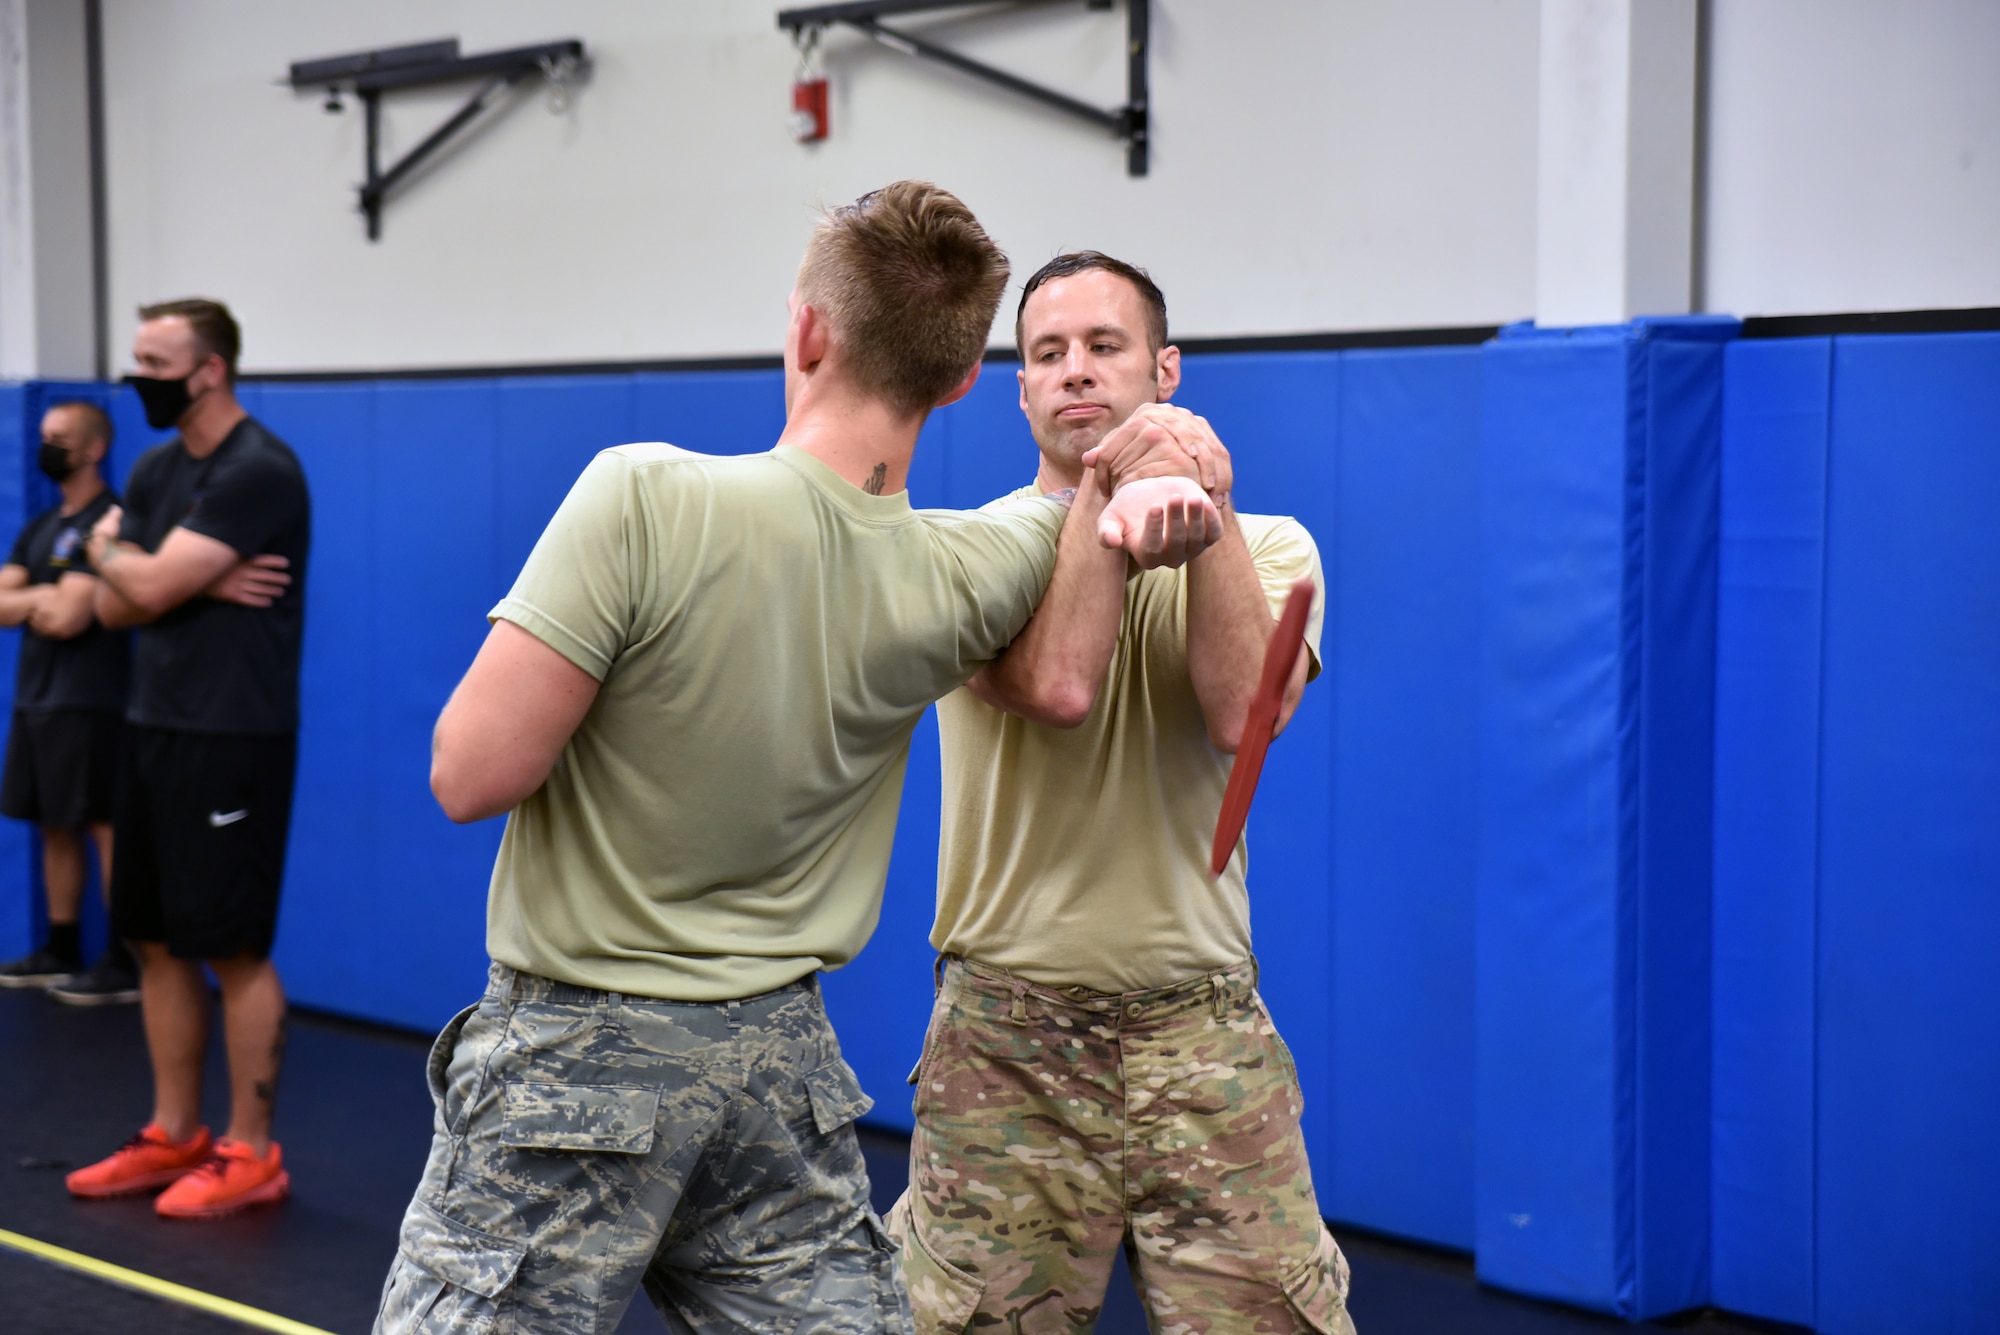 Tech. Sgt. Christopher Shultz, 60th Security Forces Squadron, disarms his training partner, Airman Jacob Walitzer, 19th Security Forces Squadron, during the Phoenix Rave Qualification Course at the U.S. Air Force Expeditionary Center, Aug. 14, 2020, at Joint Base McGuire-Dix-Lakehurst, New Jersey. The course, which ran from July 27 to Aug, 19, qualifies selected security forces personnel to perform as members of a force protection team assigned to deploy with Department of Defense aircraft to austere environments. Students are trained to perform as teams to detect, deter, and counter threats to personnel/aircraft at deployed locations by performing close-in aircraft security and advising aircrew on force protection measures. In addition, the course prepares students to conduct/report airfield assessments and perform flight deck denial duties on select missions. (U.S. Air Force photo by Maj. George Tobias)